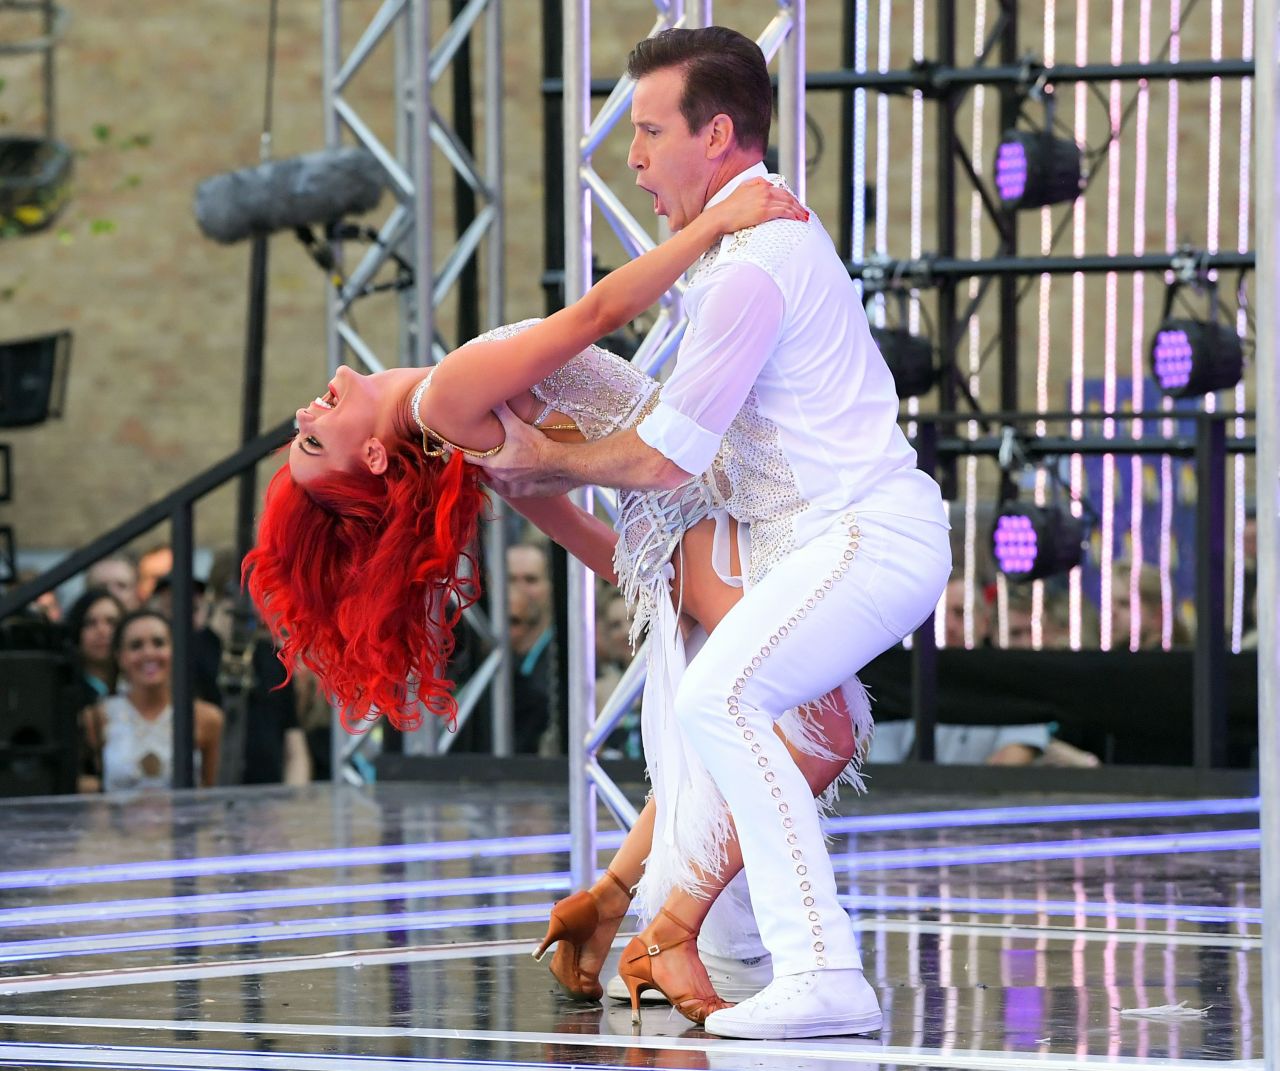 dianne-buswell-strictly-come-dancing-tv-show-launch-in-london-08-26-2019-0.jpg